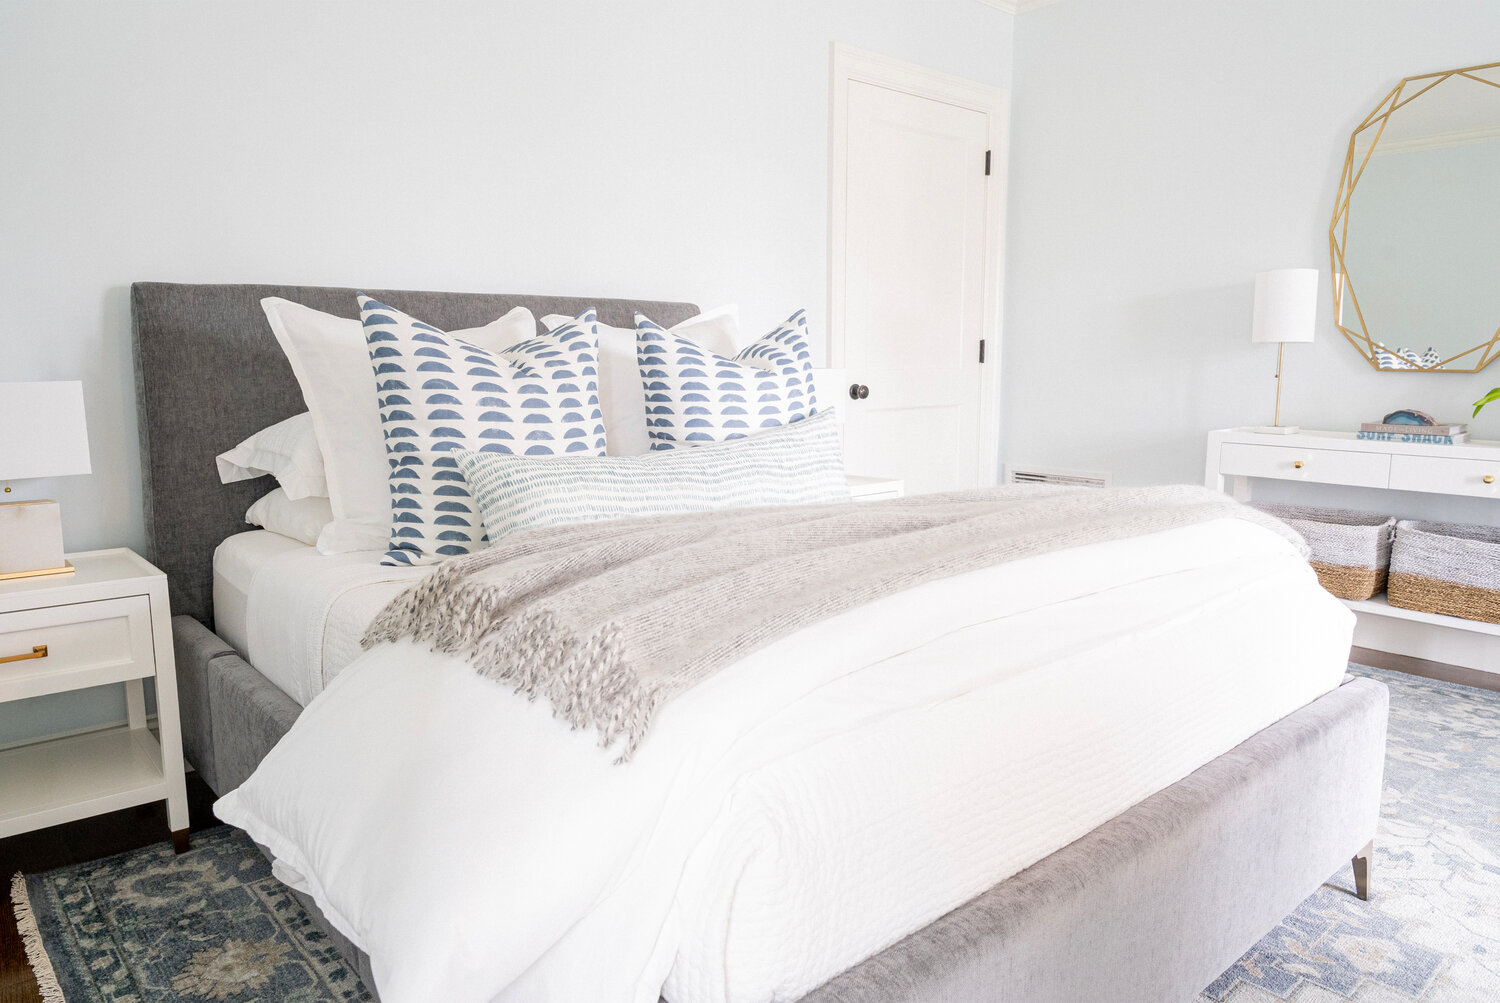 Textures and patterns keep seemingly simple bed linens interesting